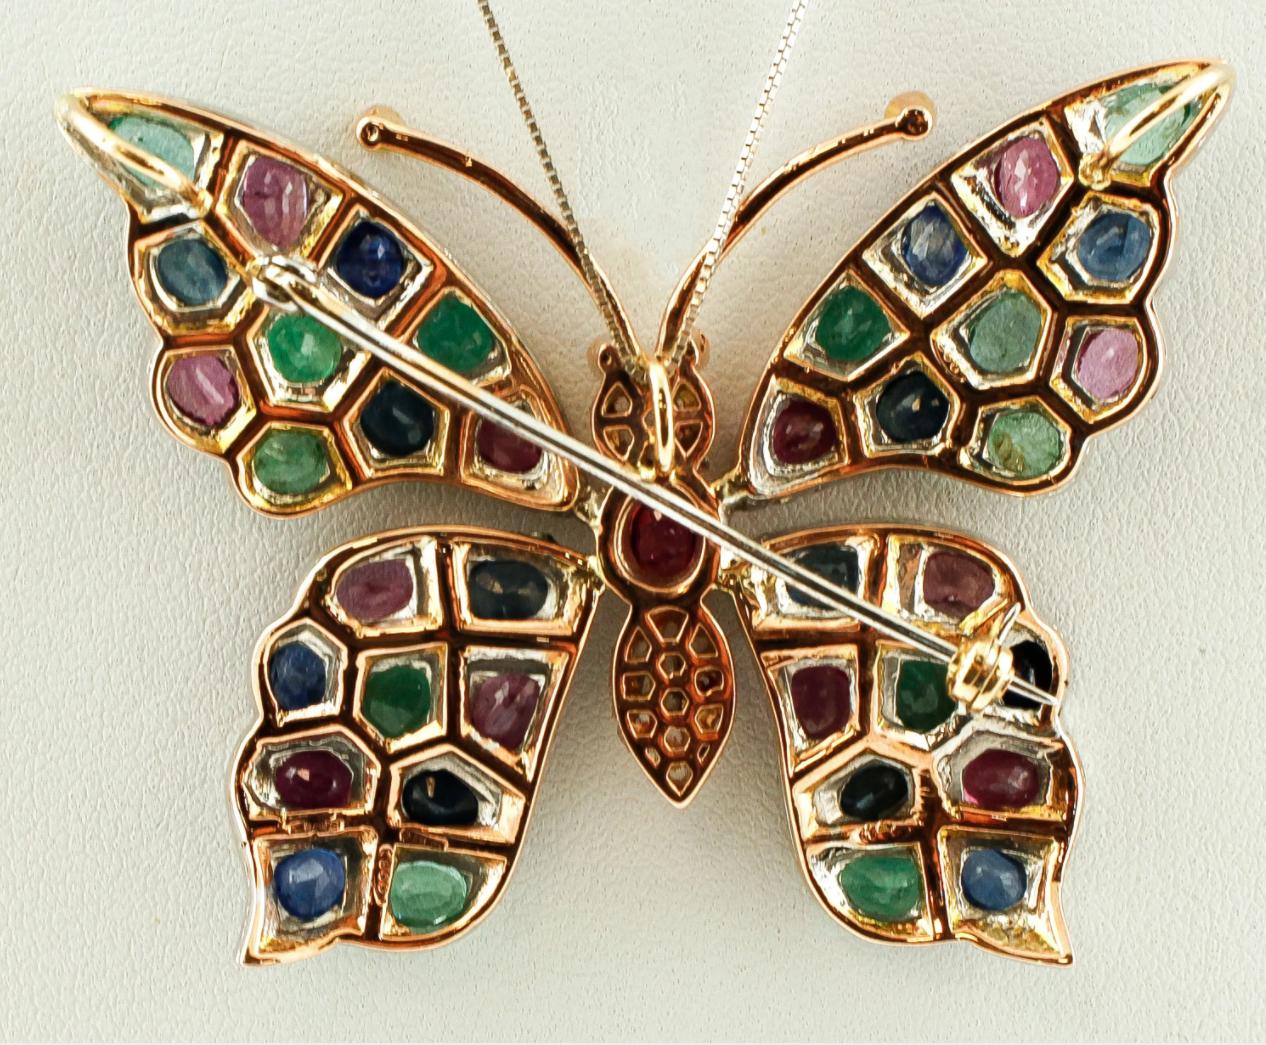 SHIPPING POLICY:
No additional costs will be added to this order.
Shipping costs will be totally covered by the seller (customs duties included).

Vintage brooch/pendant in 9k rose gold and silver structure with butterfly design. The butterfly's